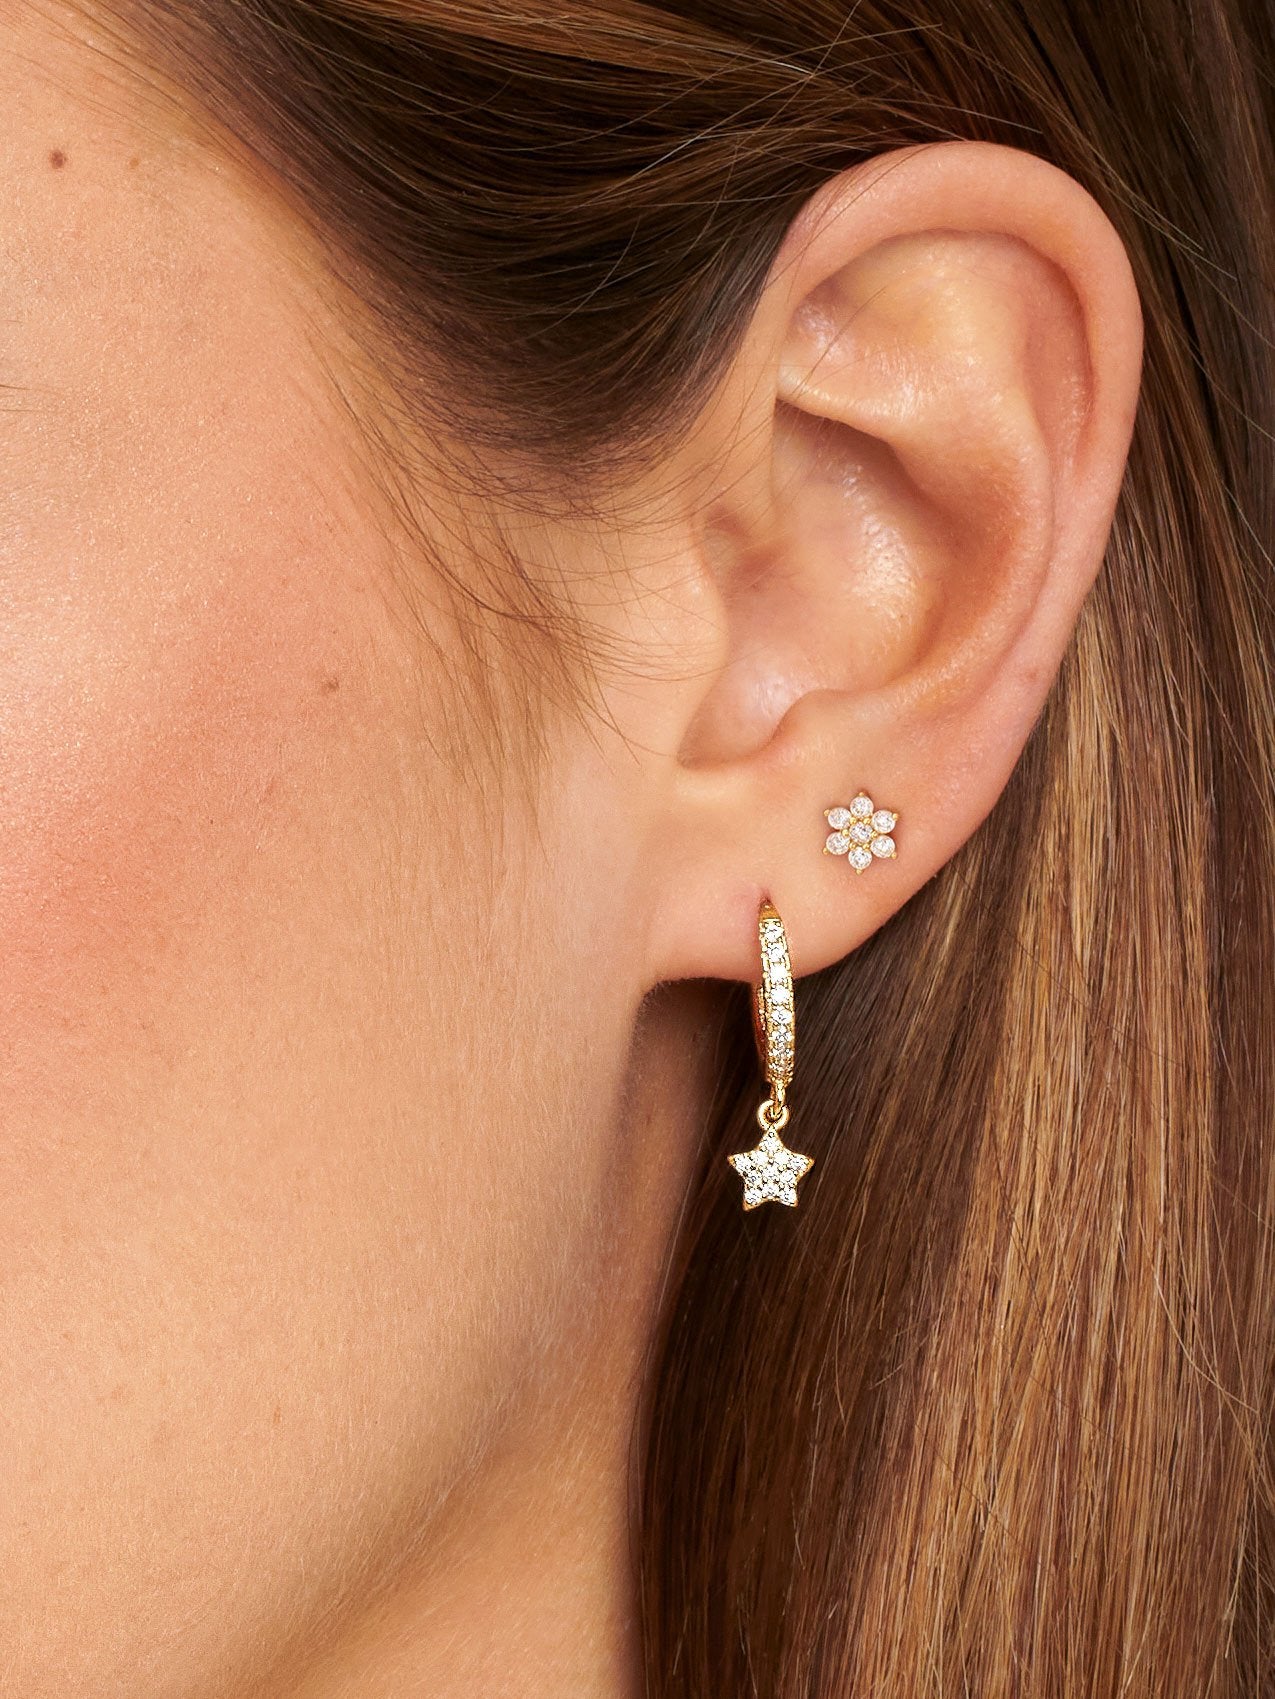 Tiny gold stud earrings paired with gold hoops for curated ear-stack.